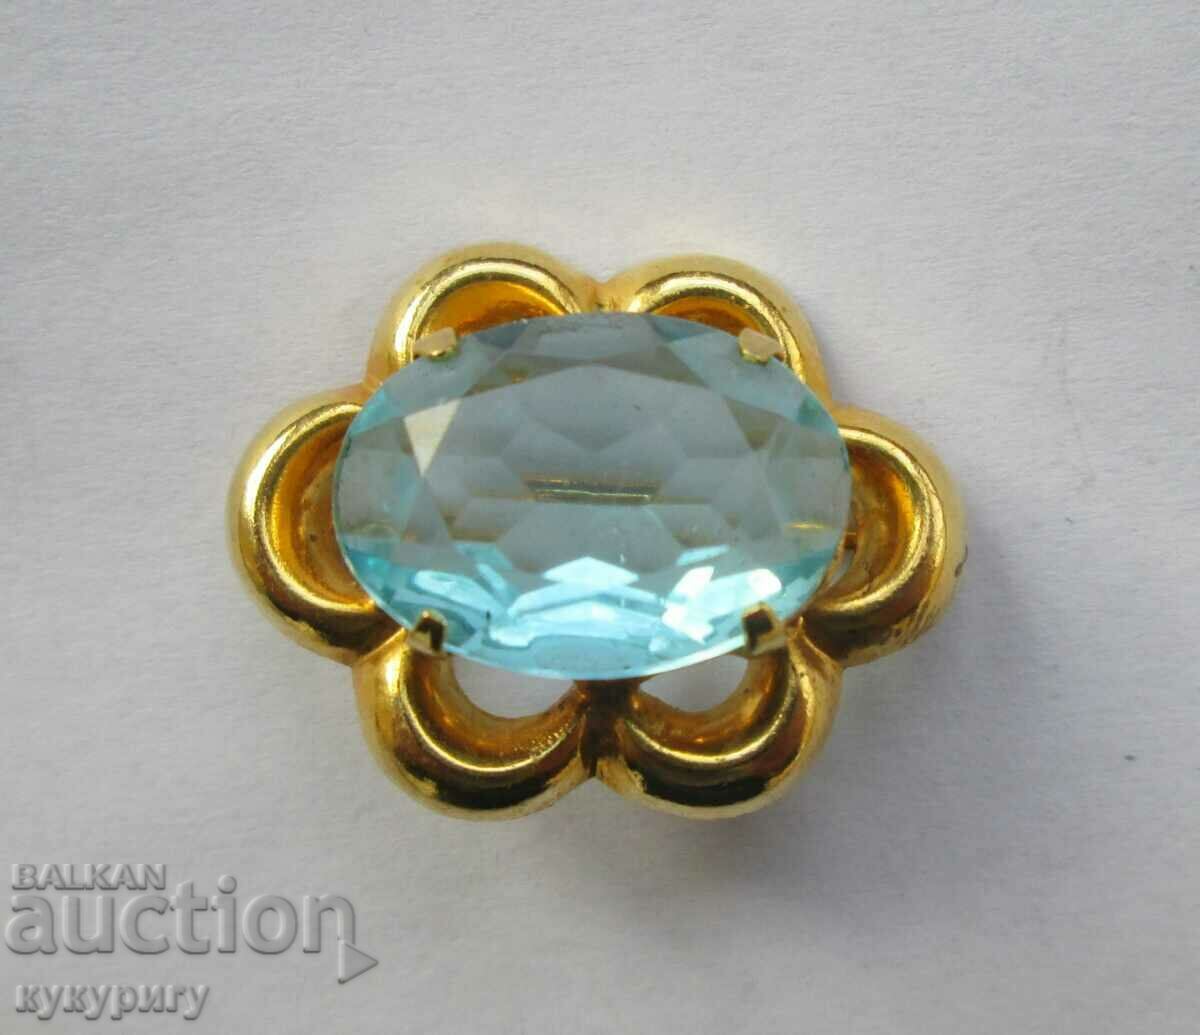 A beautiful old elegant lady's brooch with a light blue stone